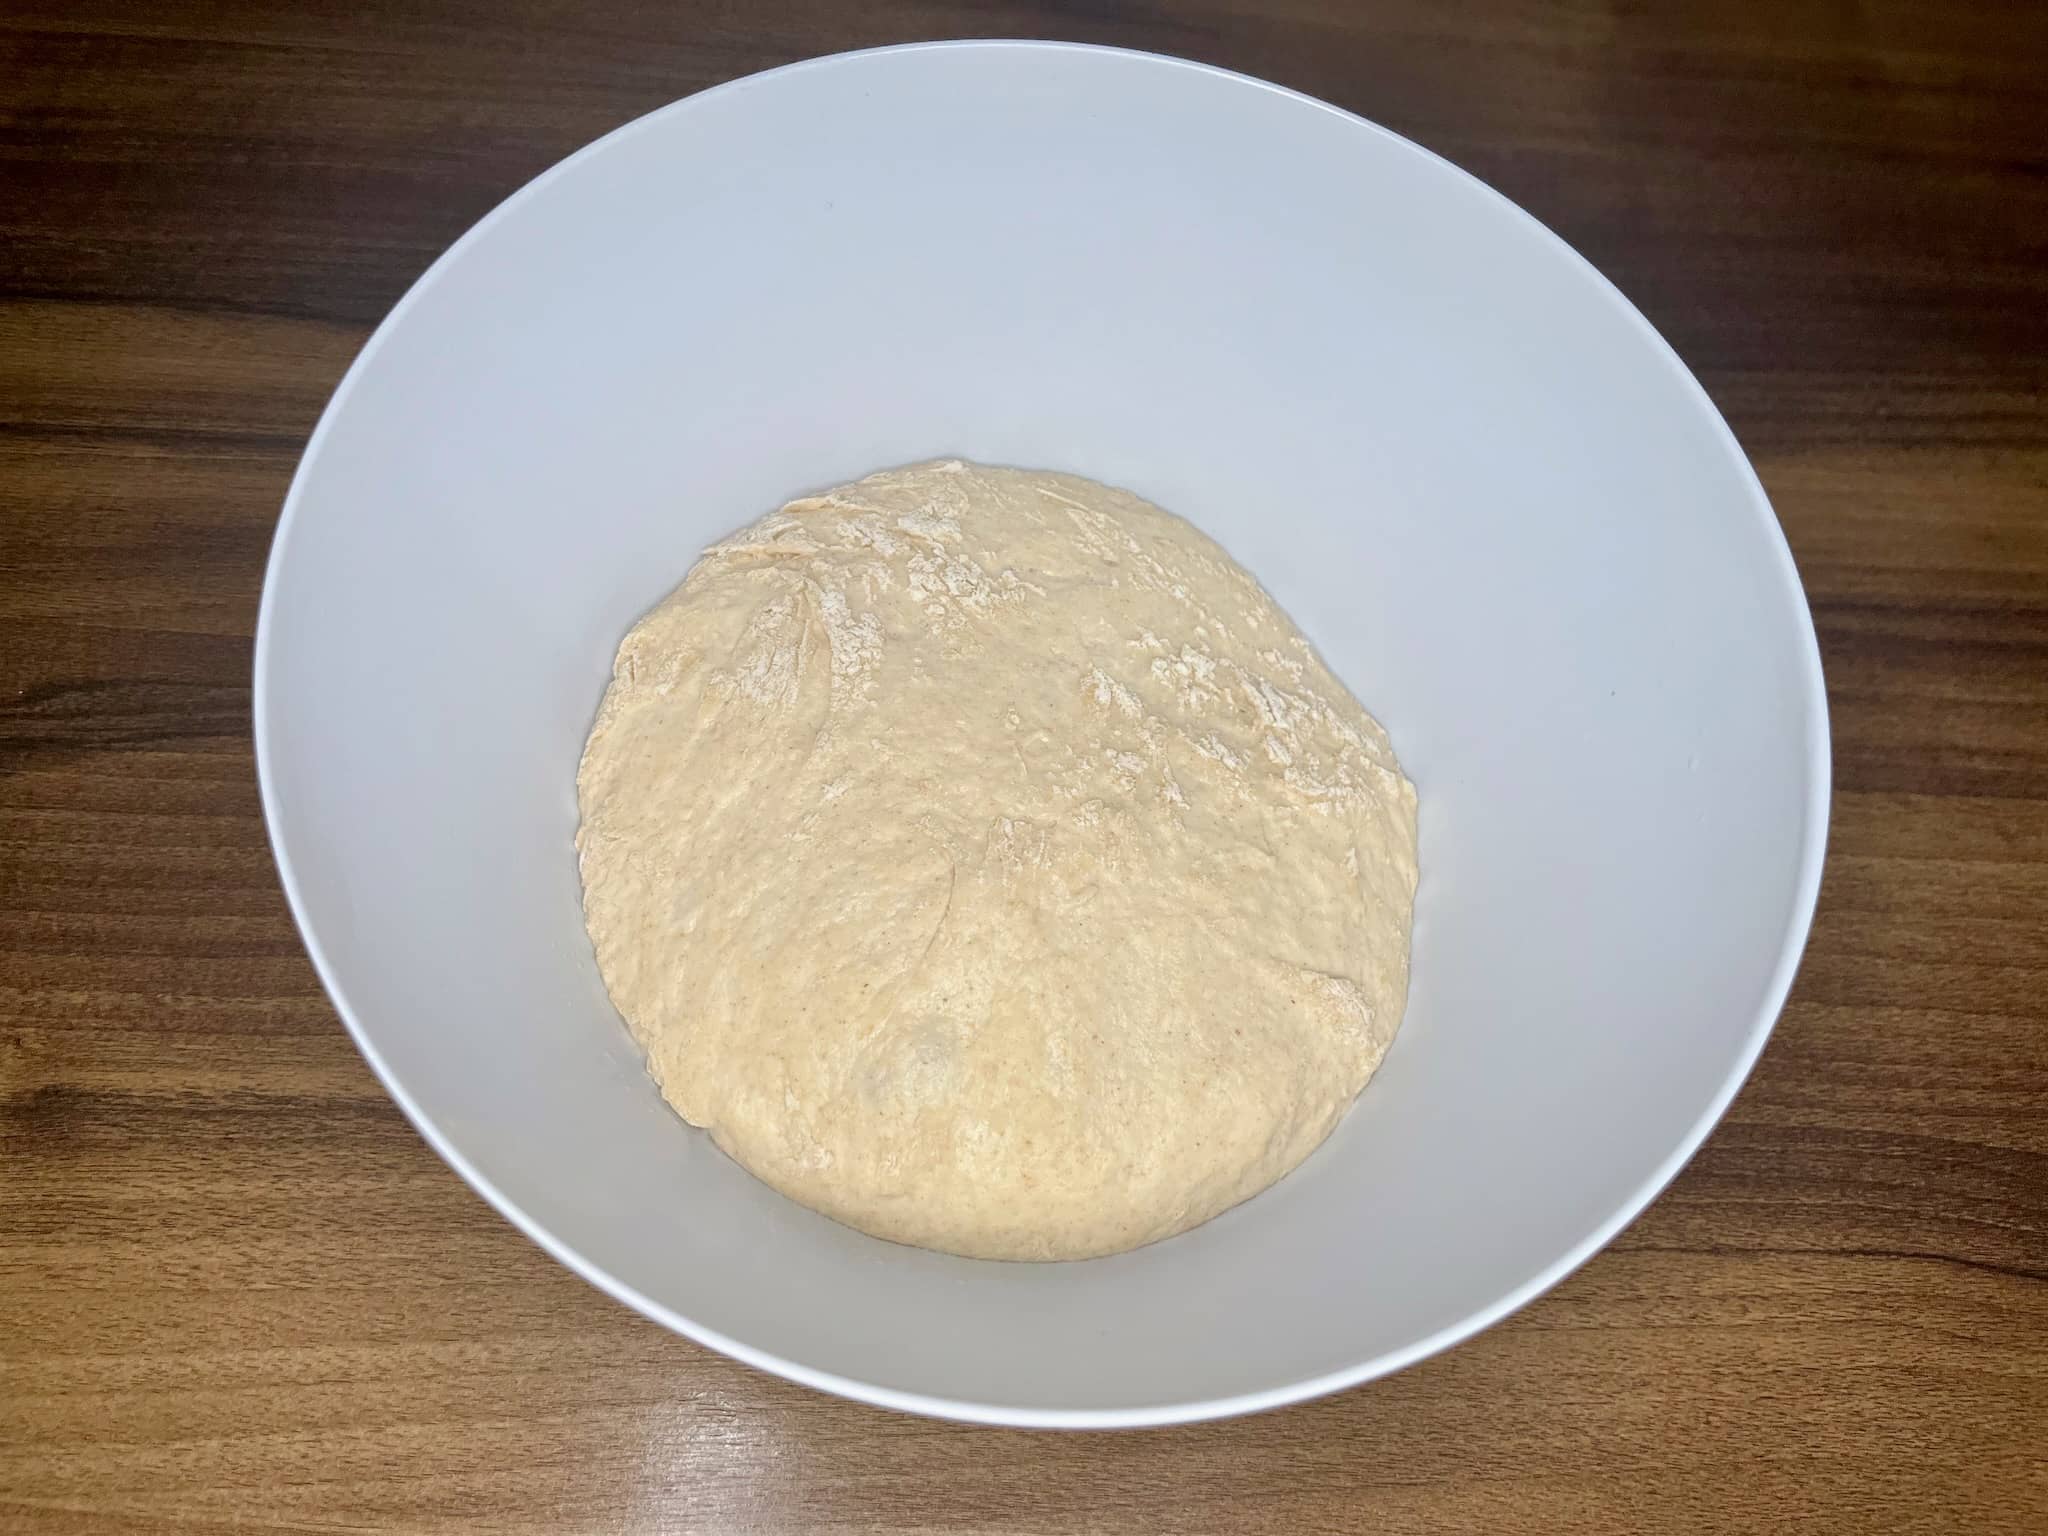 Well-kneaded dough doubled in size